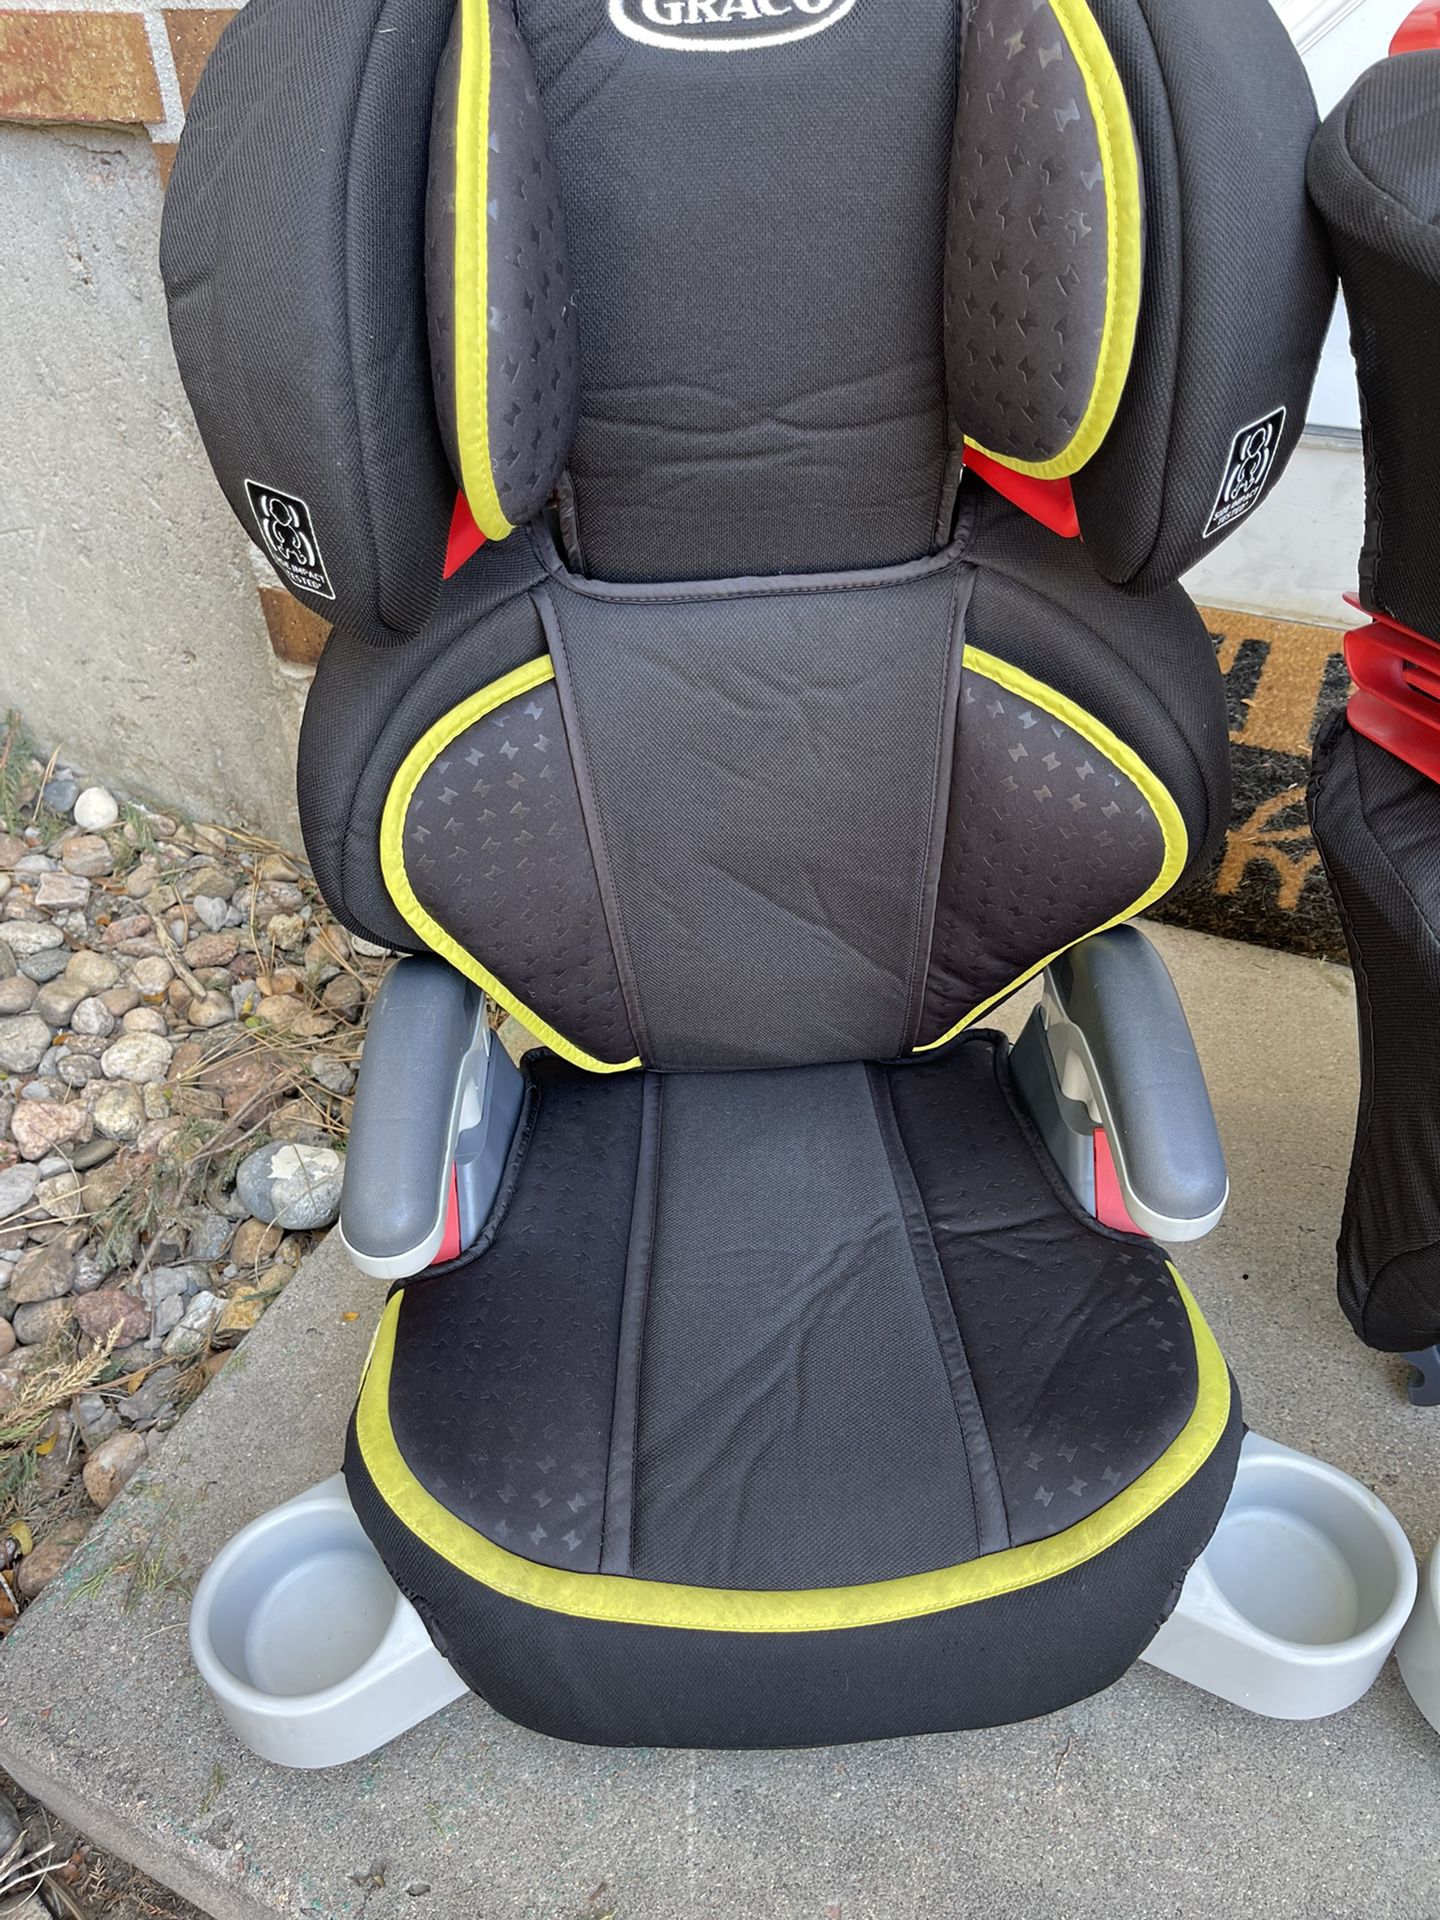 Booster Seat (1 Left) $30 